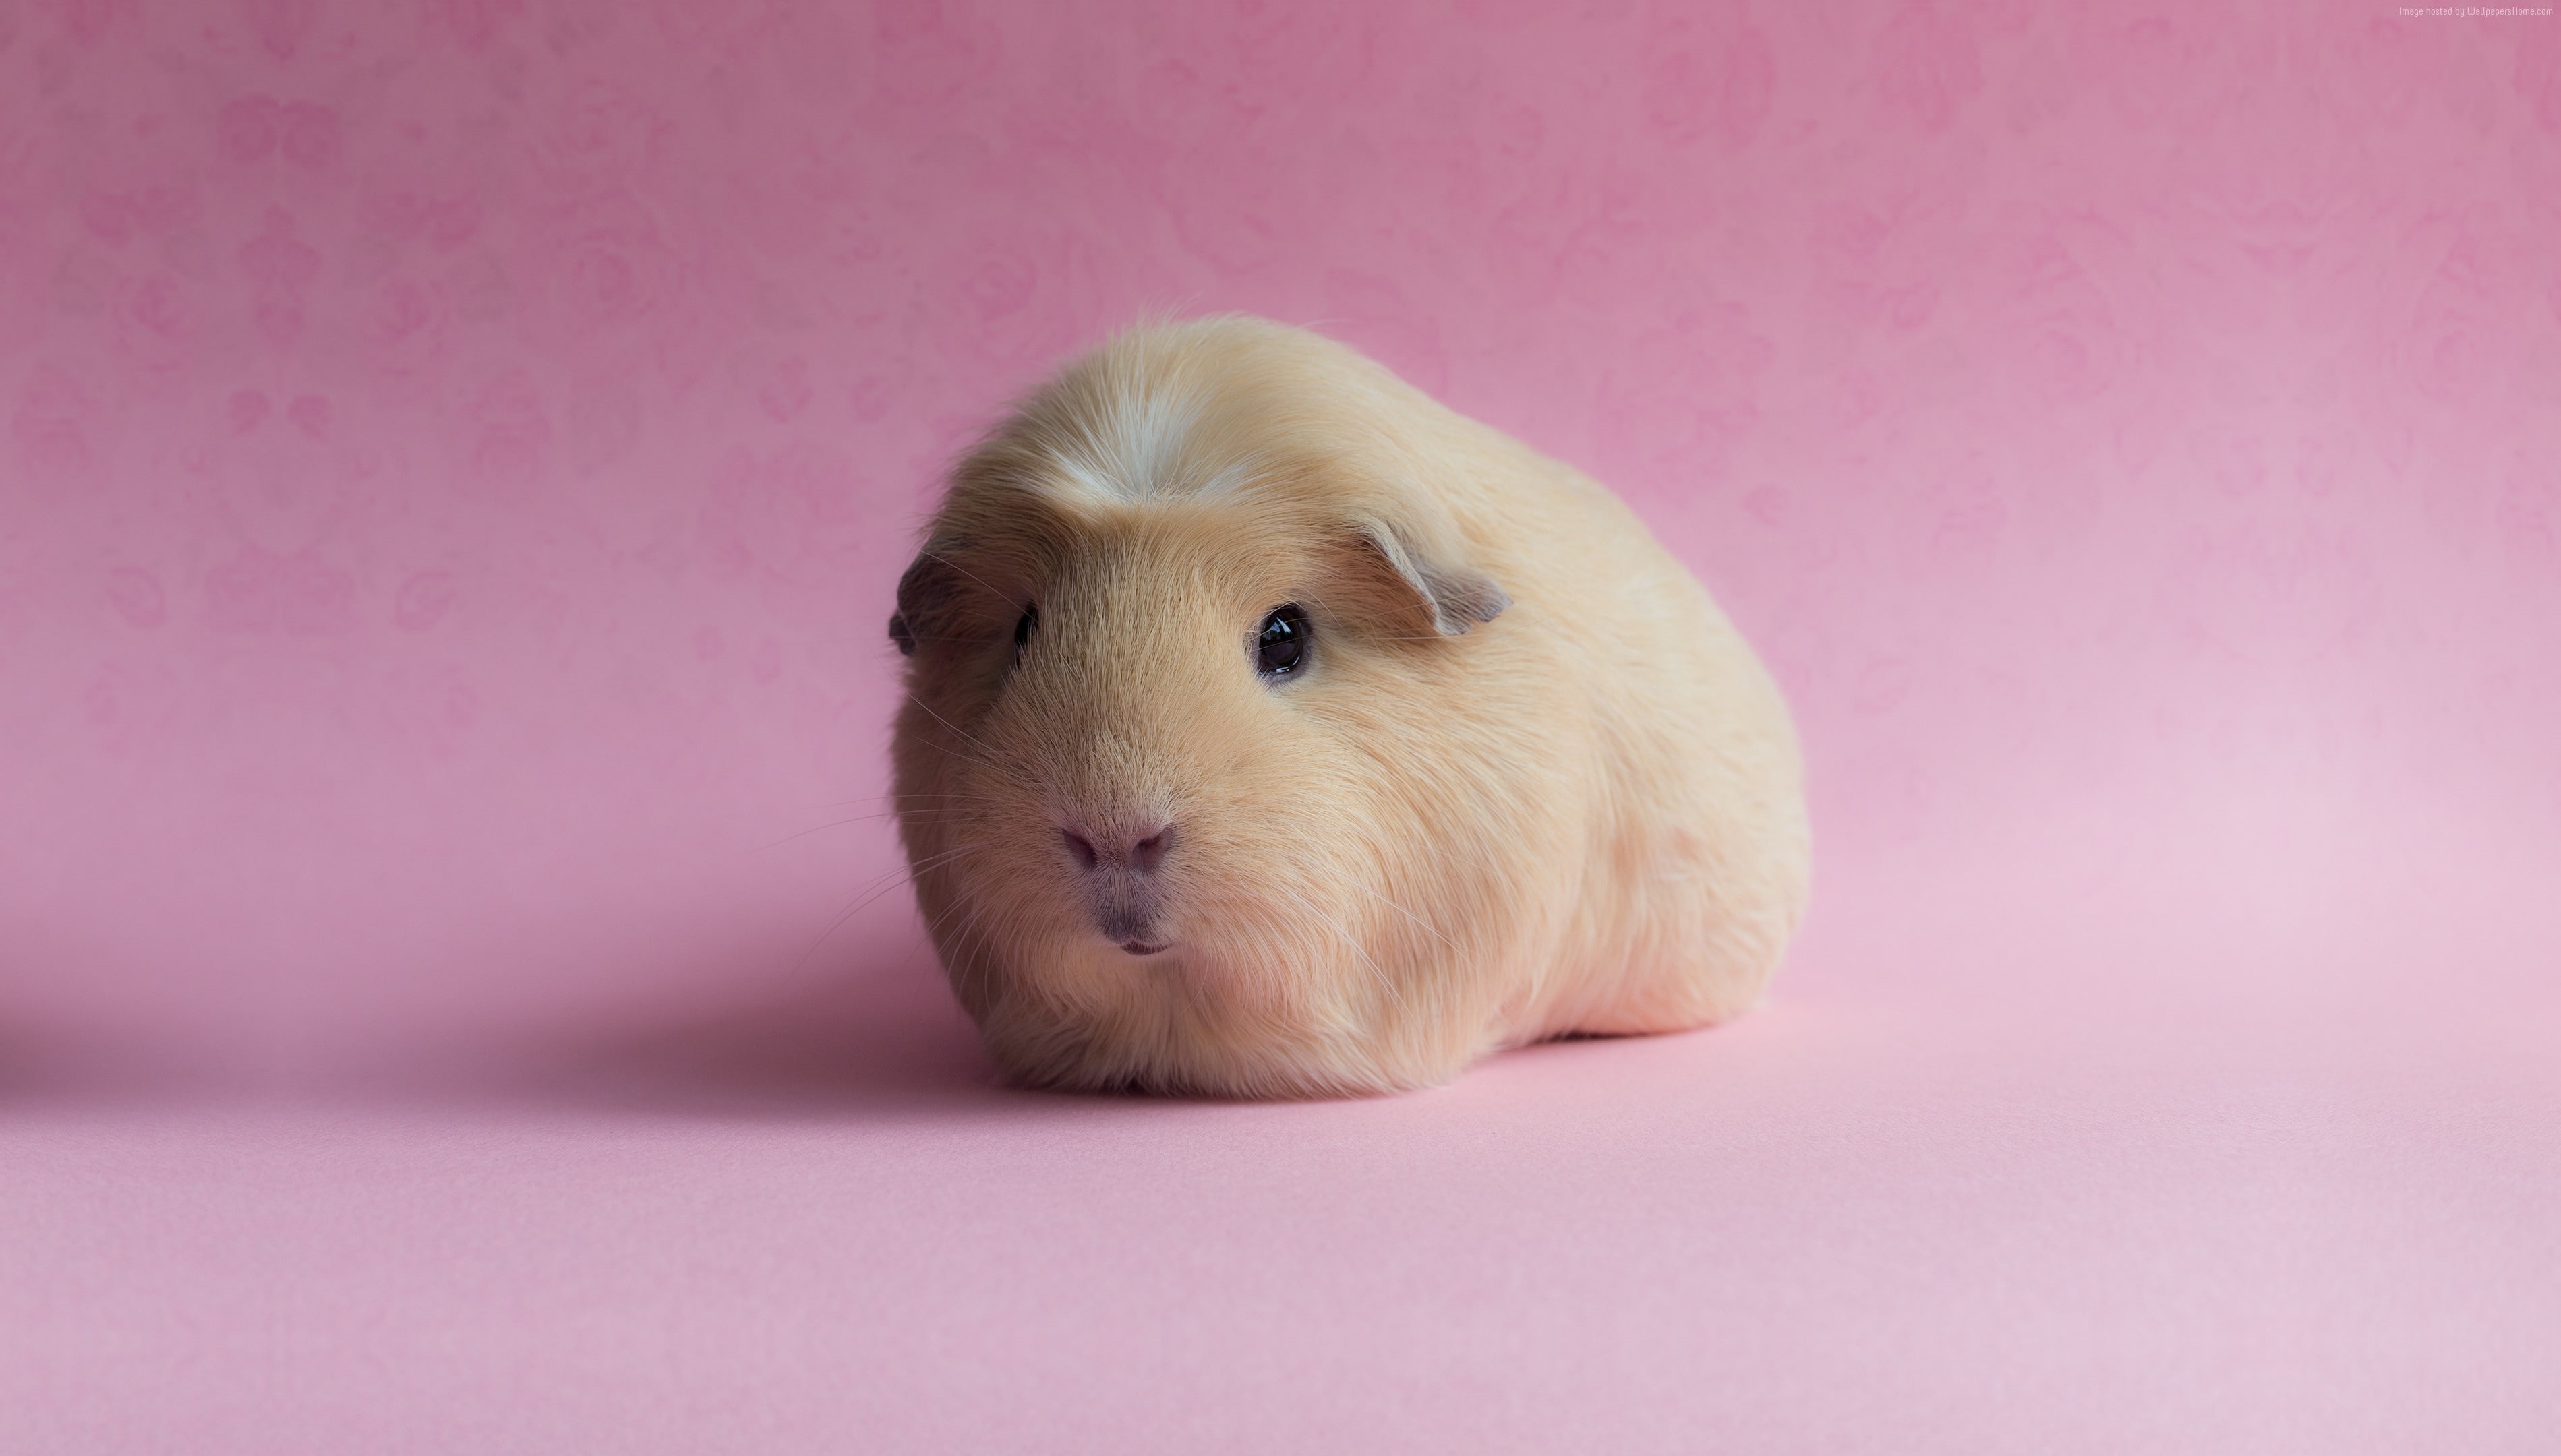 Guinea Pig, funny animals, pink